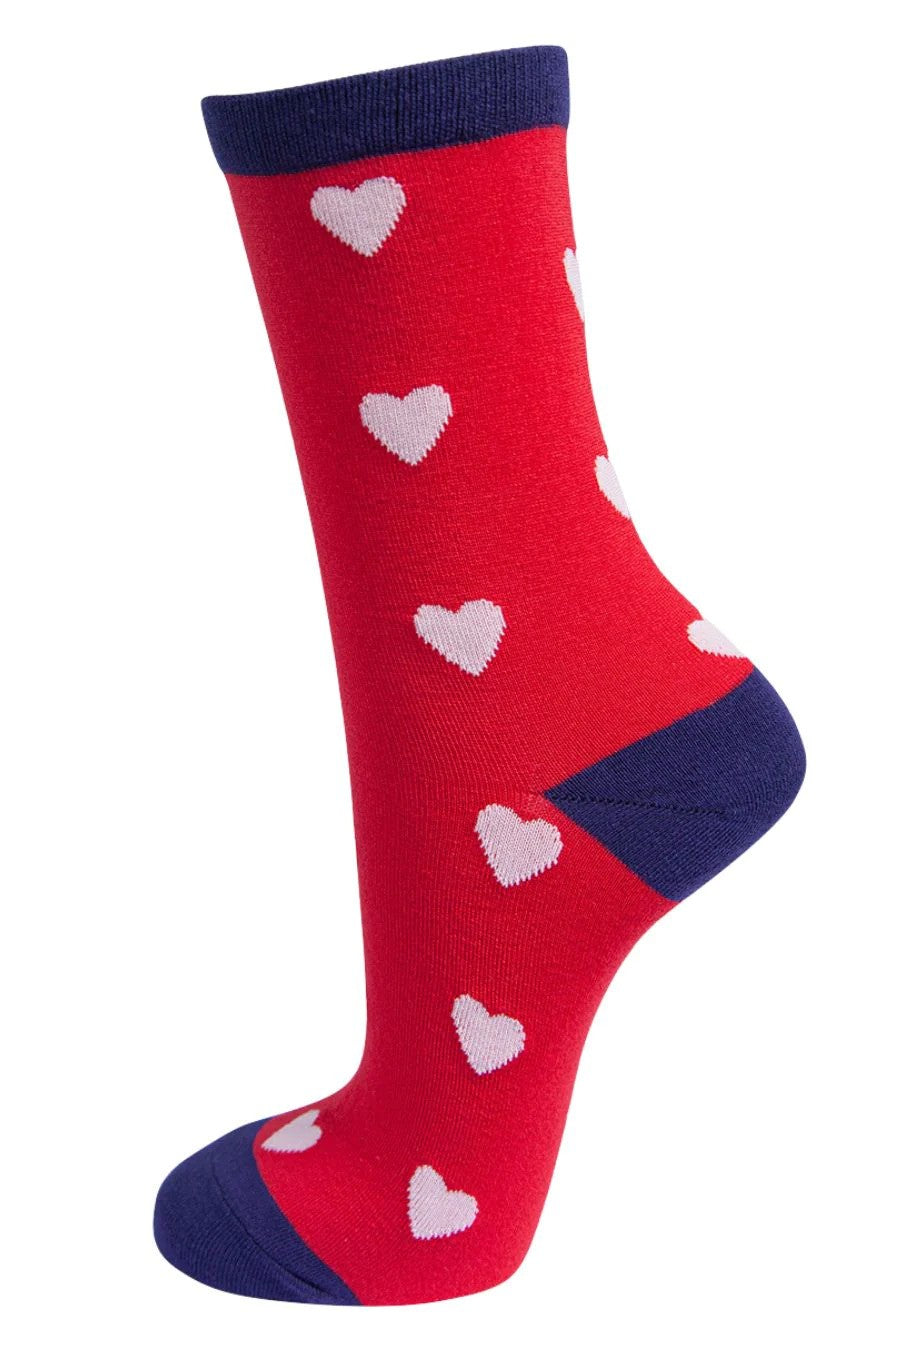 Red with White Hearts Bamboo Socks